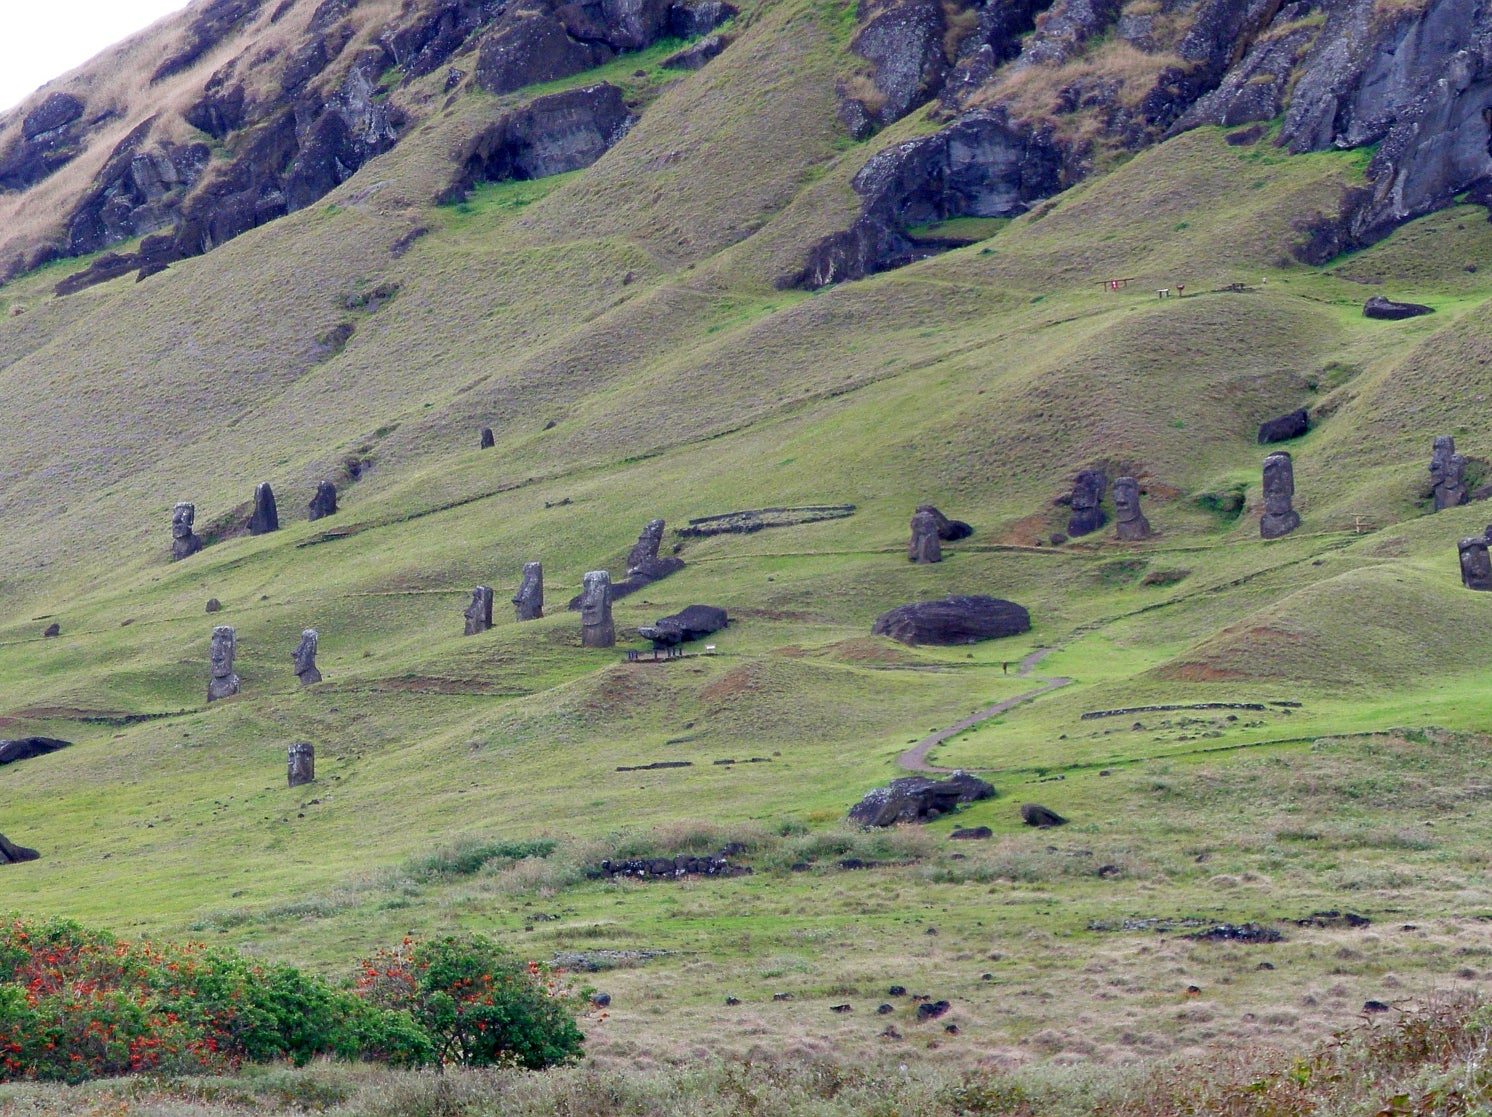 Giant stone statues on the outer slopes of Easter Island’s volcanic crater